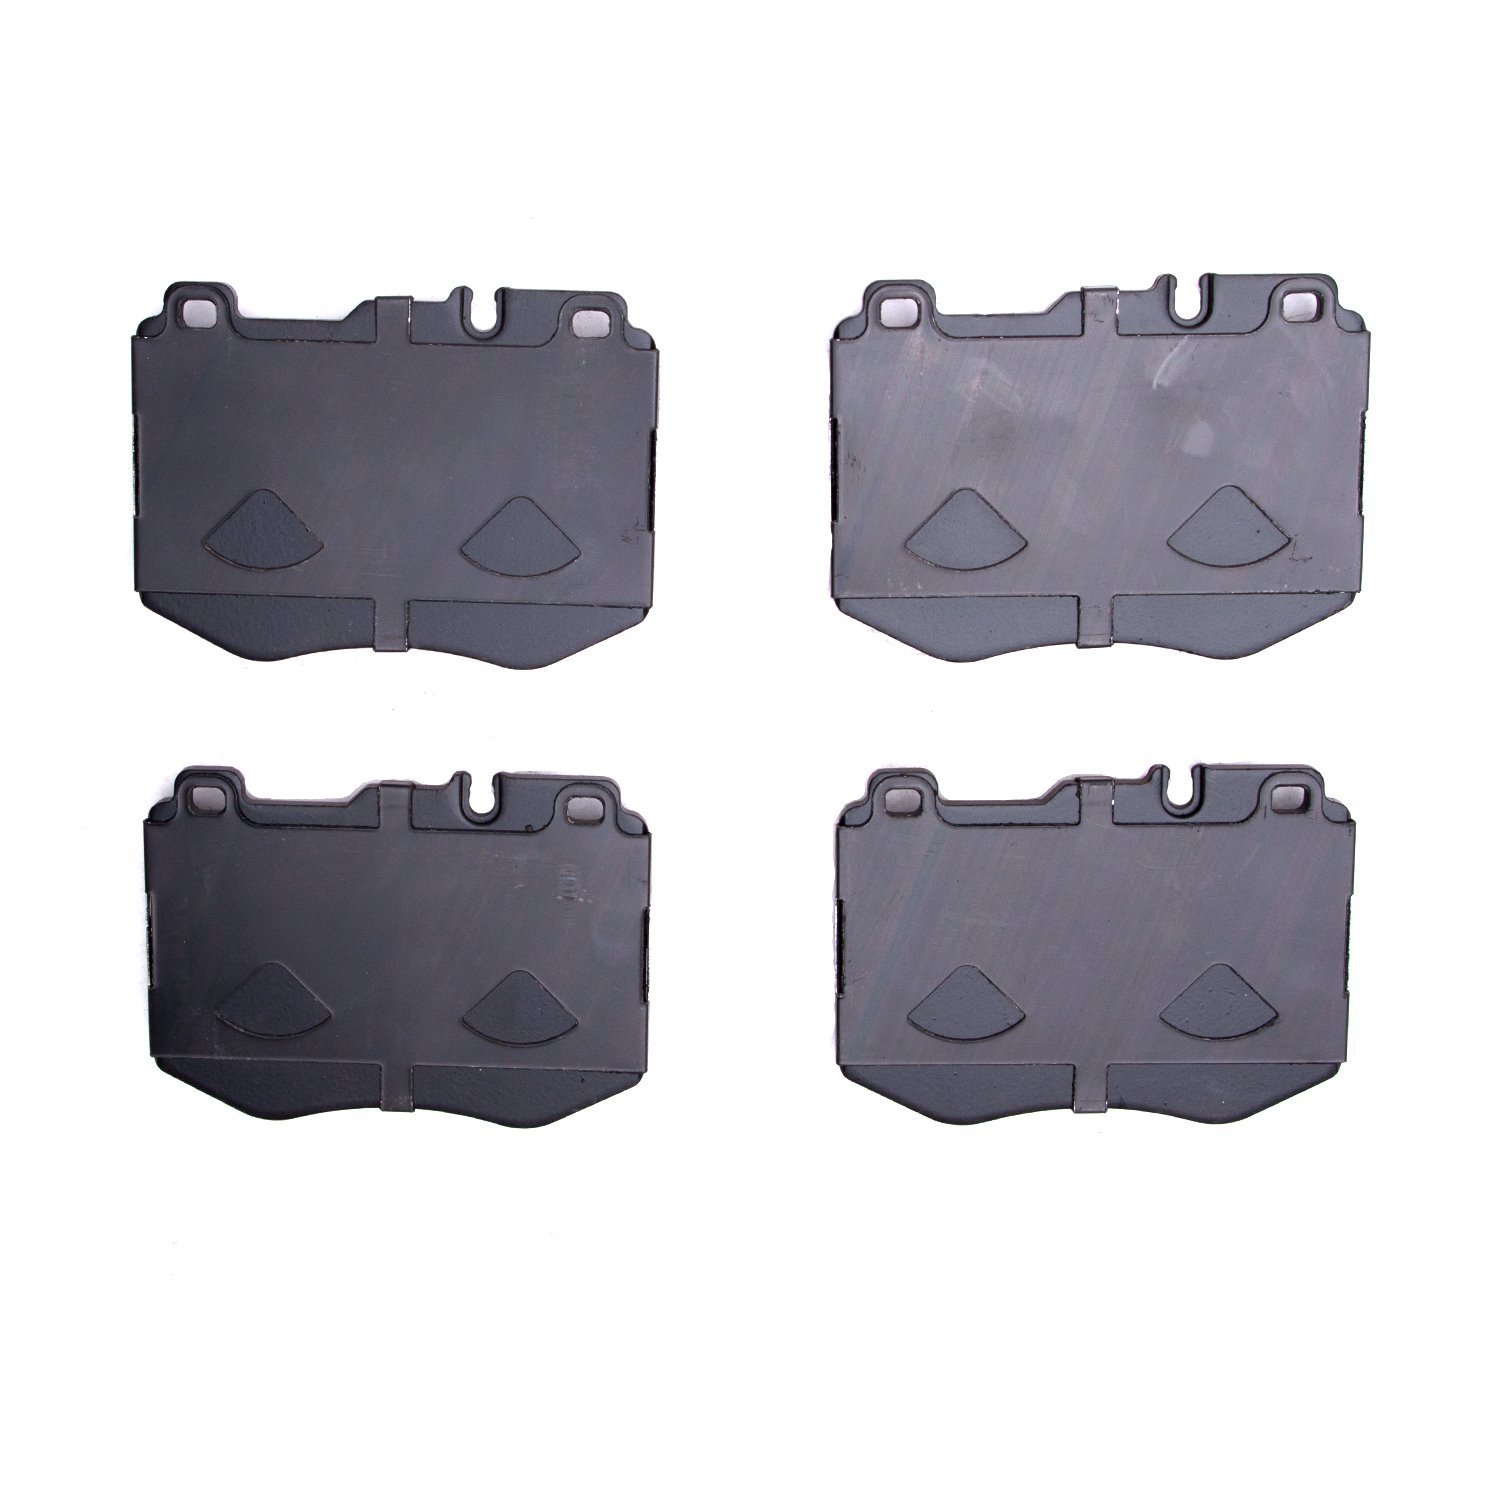 1553-1796-00 5000 Advanced Low-Metallic Brake Pads, Fits Select Mercedes-Benz, Position: Front